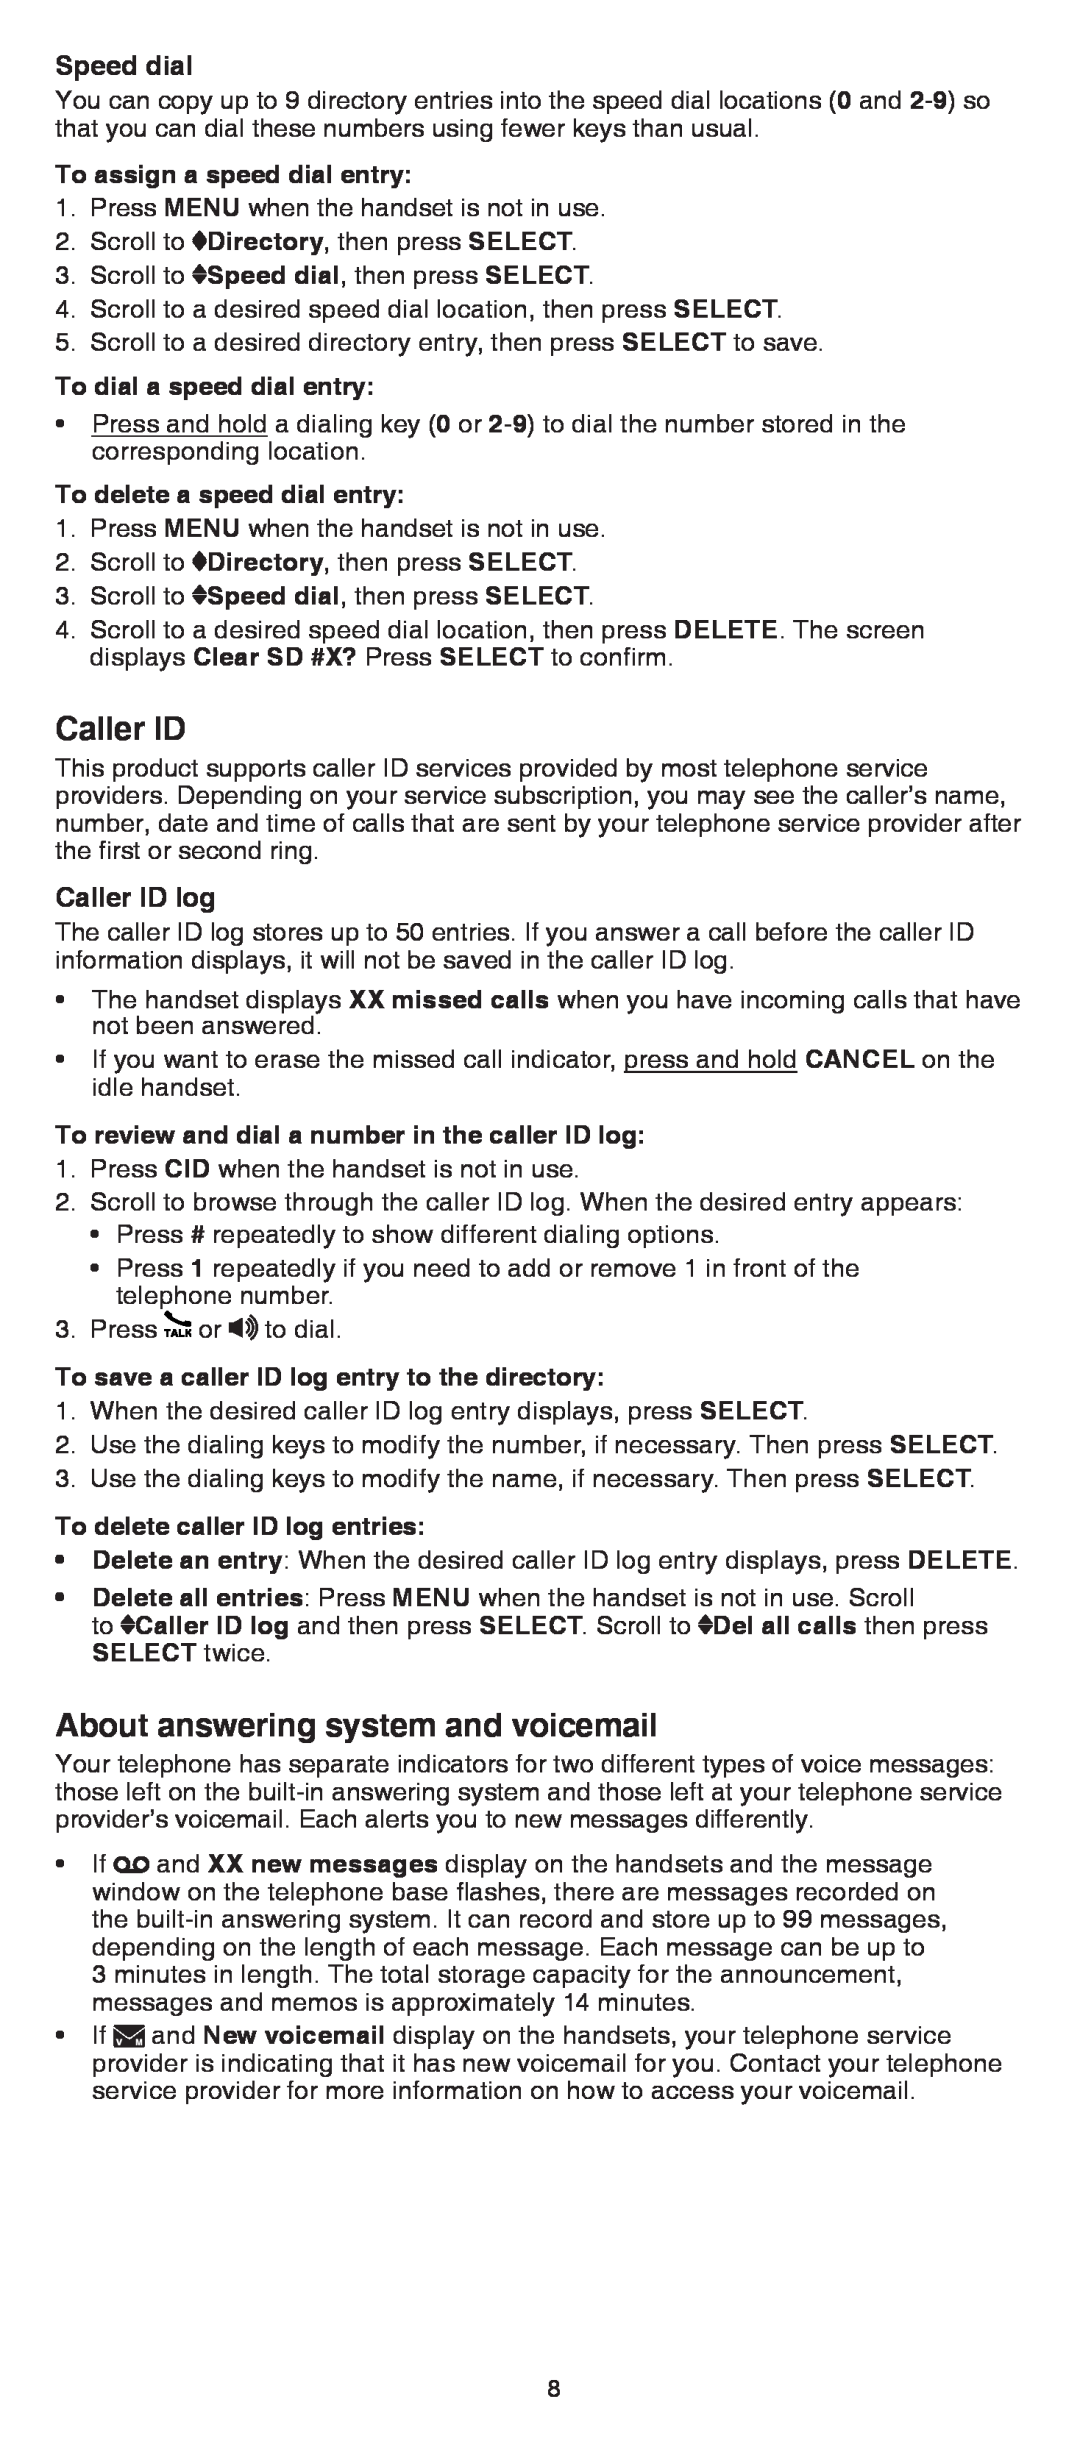 VTech CS6629/CS6629-2/CS6629-3 user manual About answering system and voicemail, Speed dial, Caller ID log 